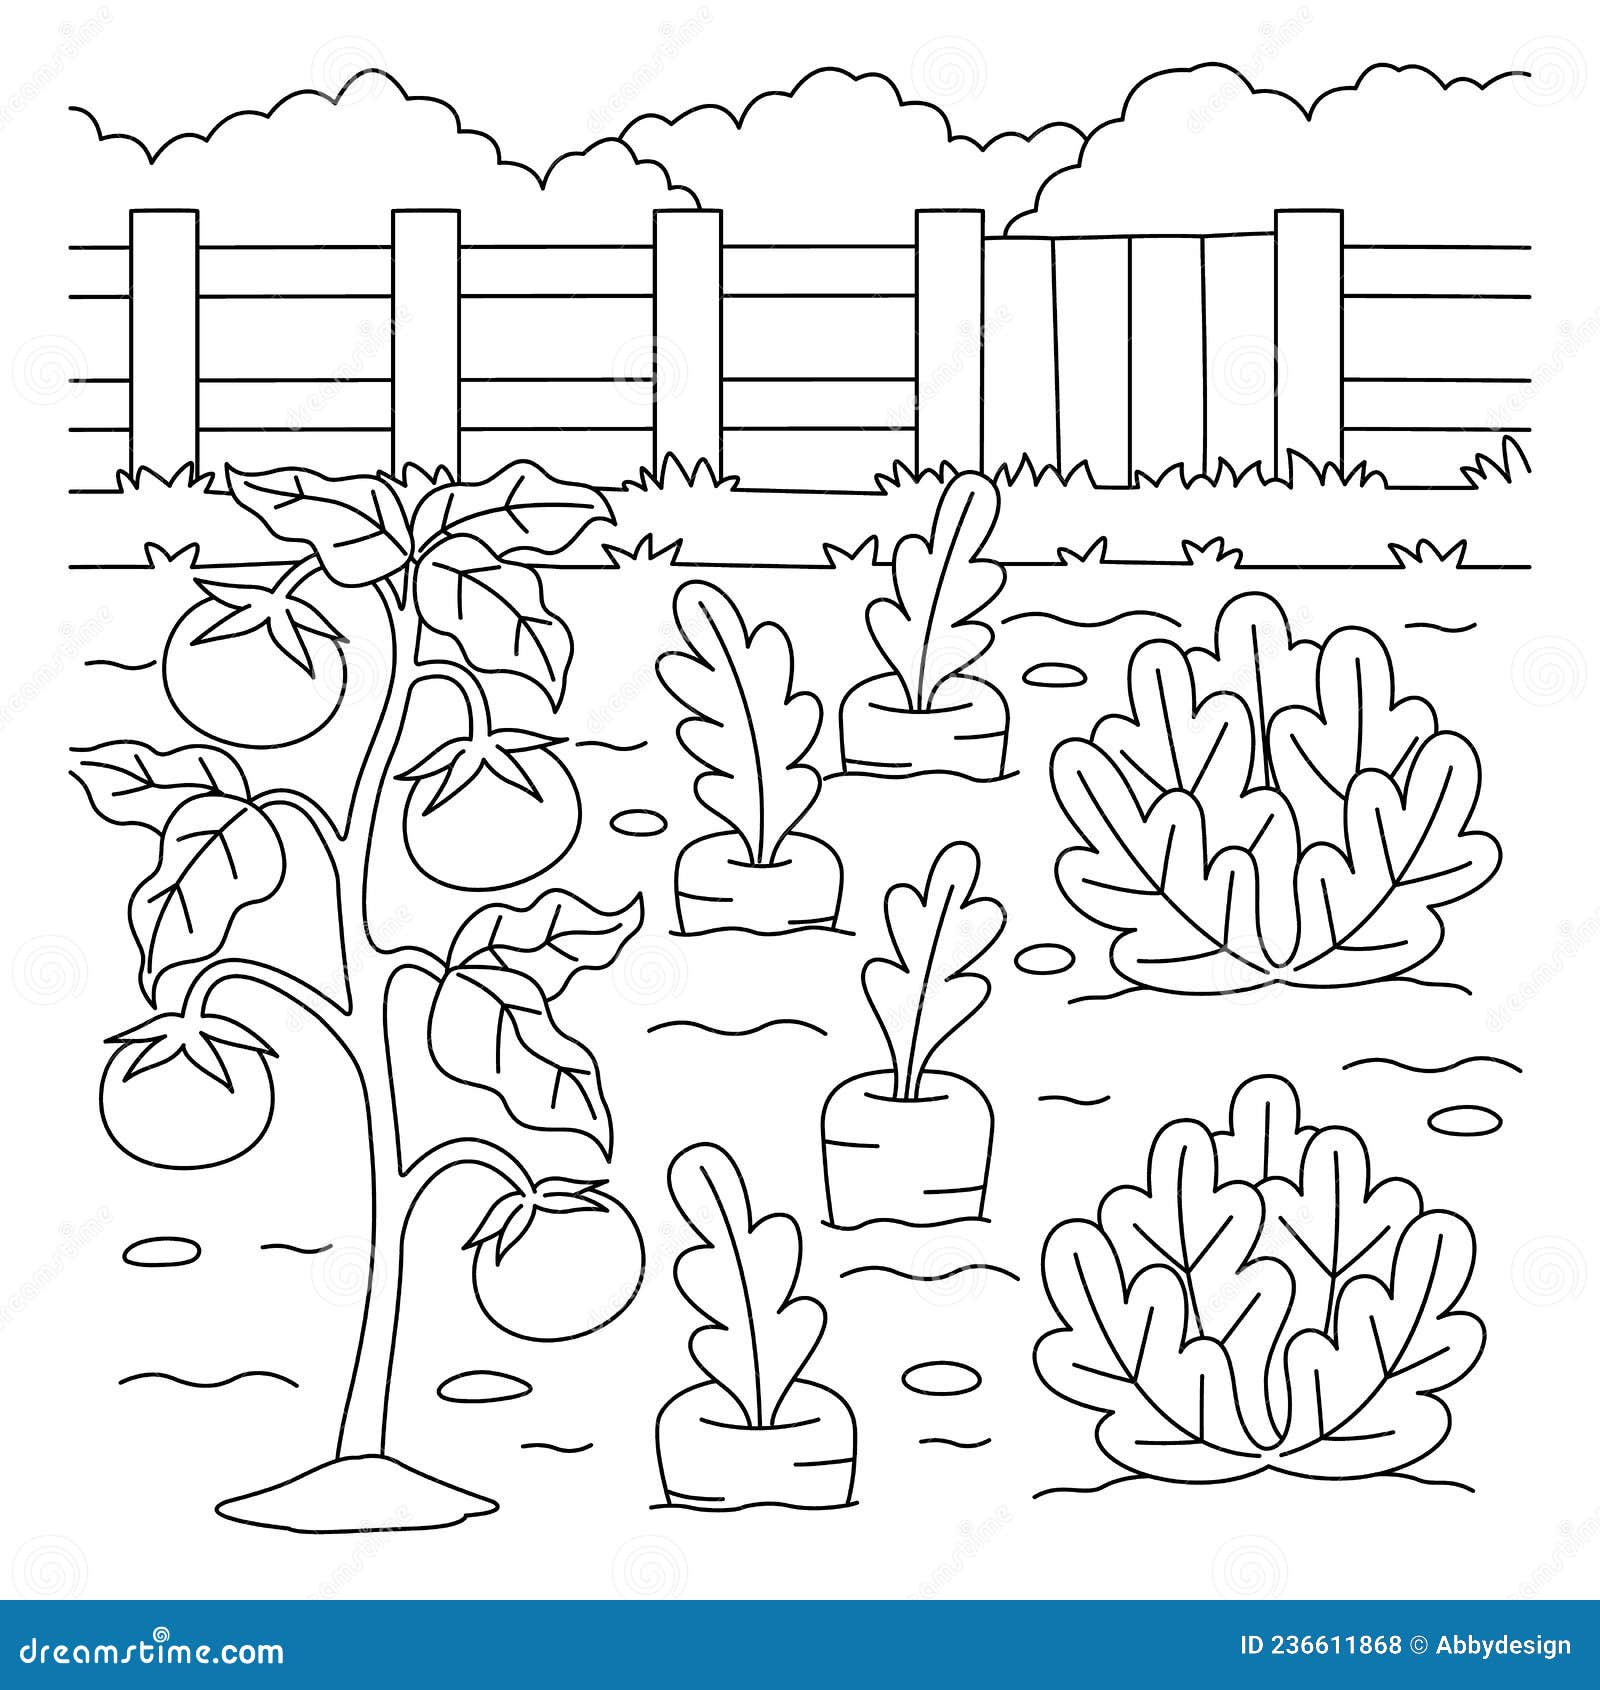 Vegetable field coloring page for kids stock vector